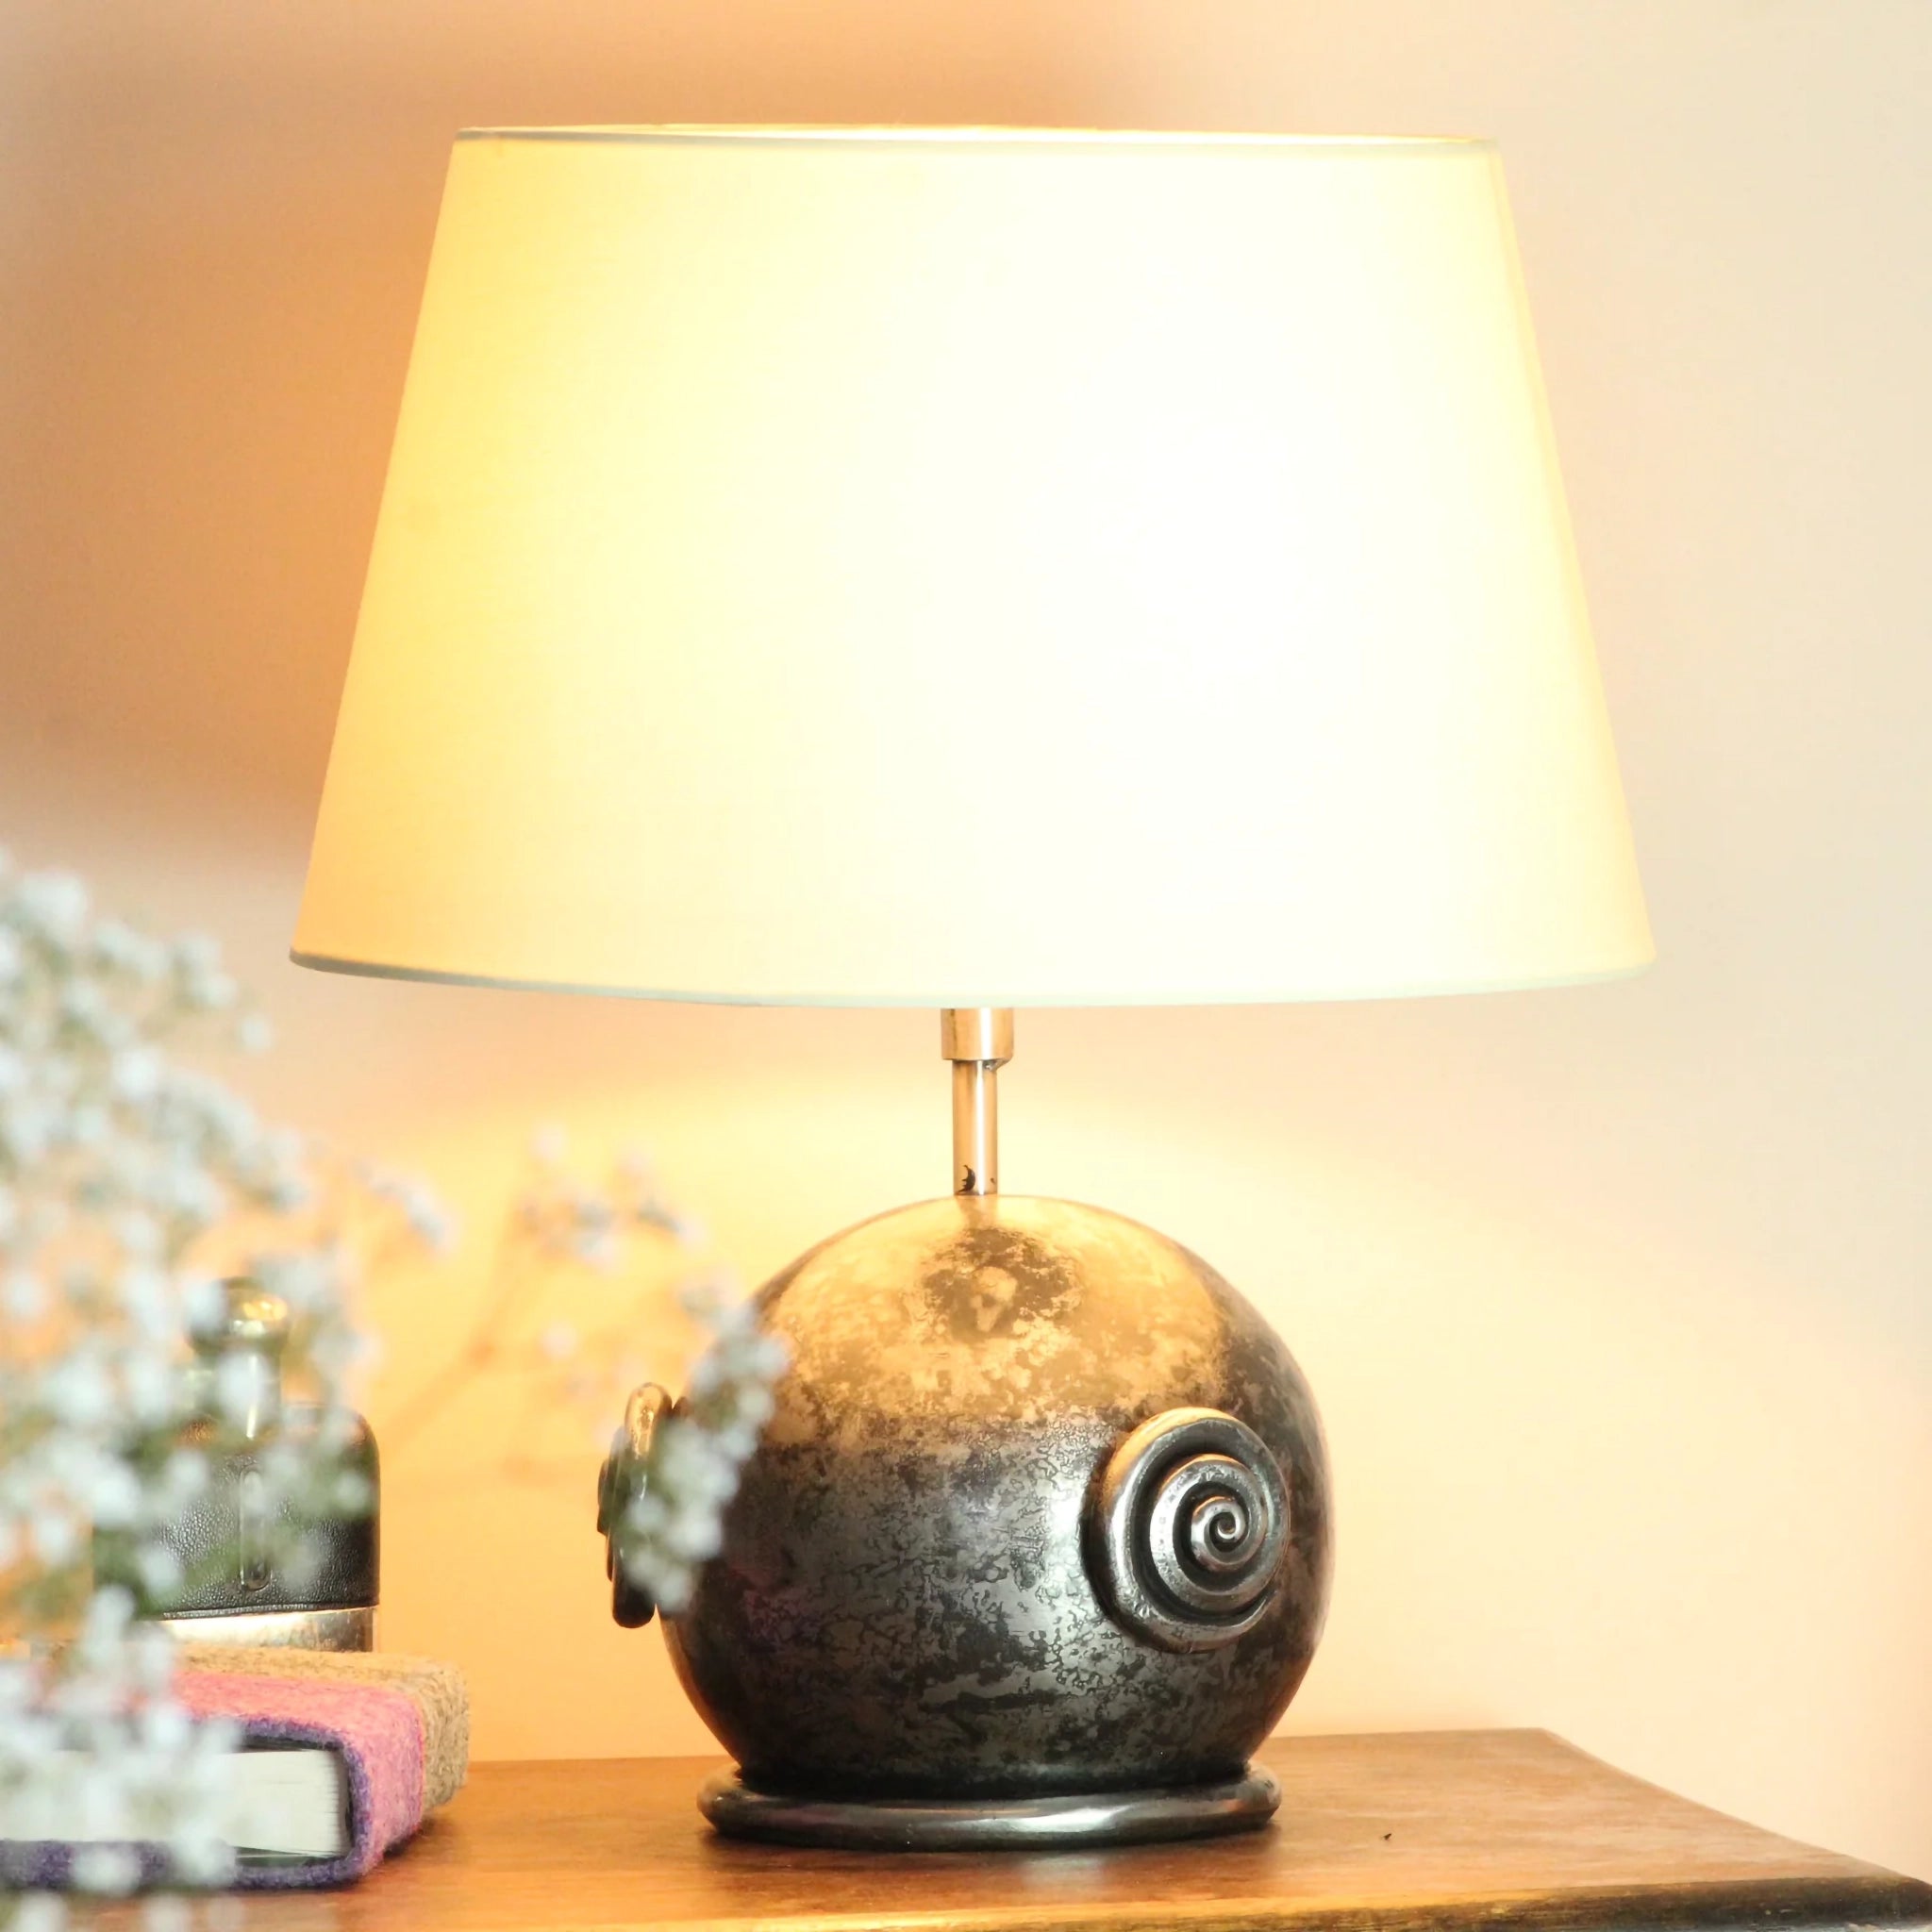 A globe shaped table lamp in a dark polished steel with a cream shallow drum shade and scroll design